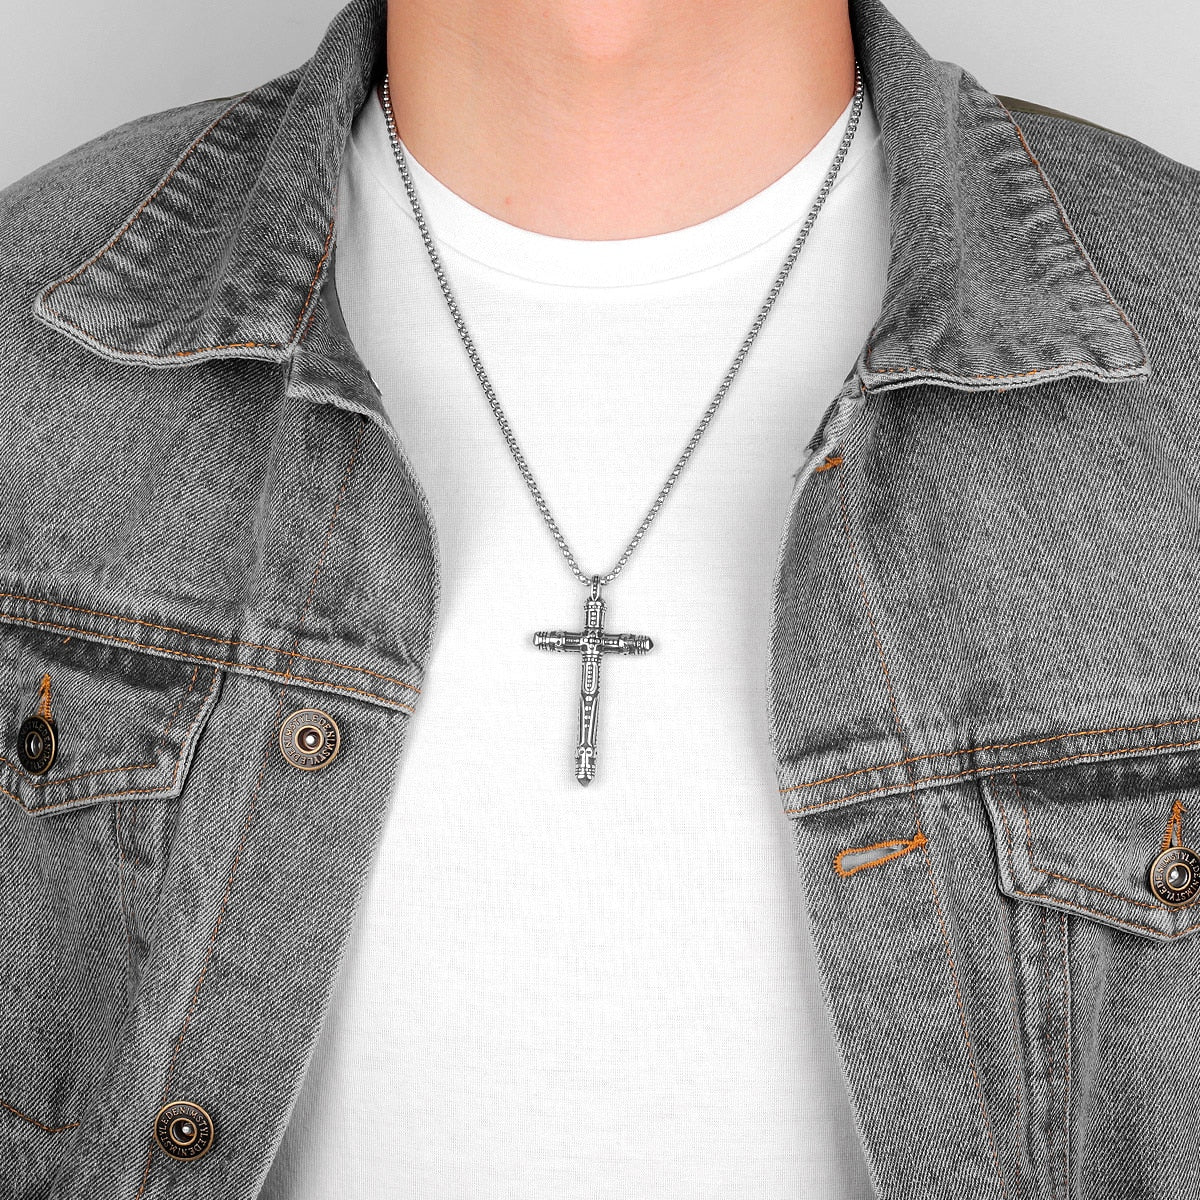 Sample View Black Or Silver Color Stainless Steel Cross Pendant Necklace Jewelry